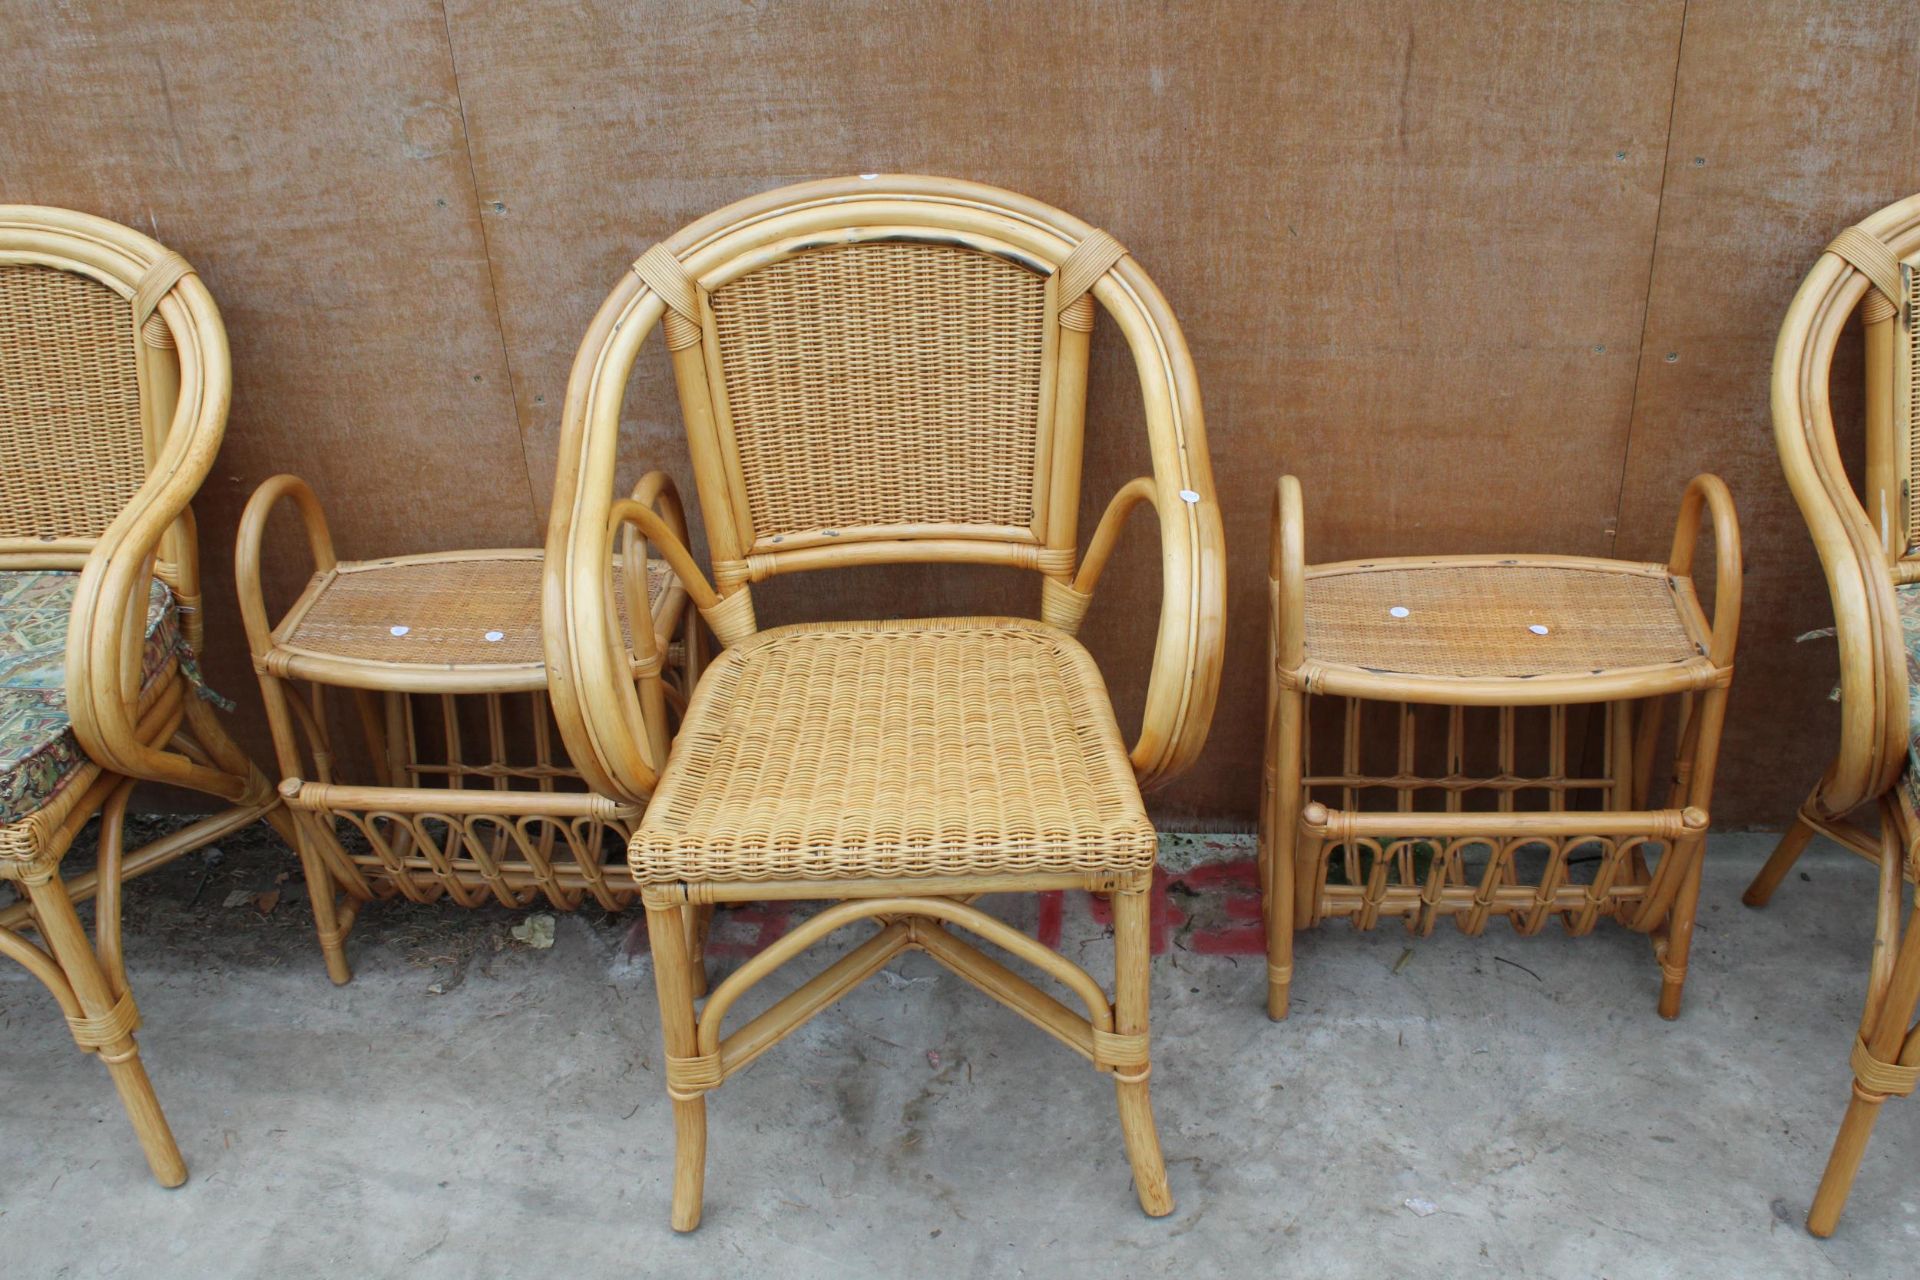 THREE WICKER AND BAMBOO ARMCHAIRS AND TWO MAGAZINE RACKS/TABLES - Image 2 of 2